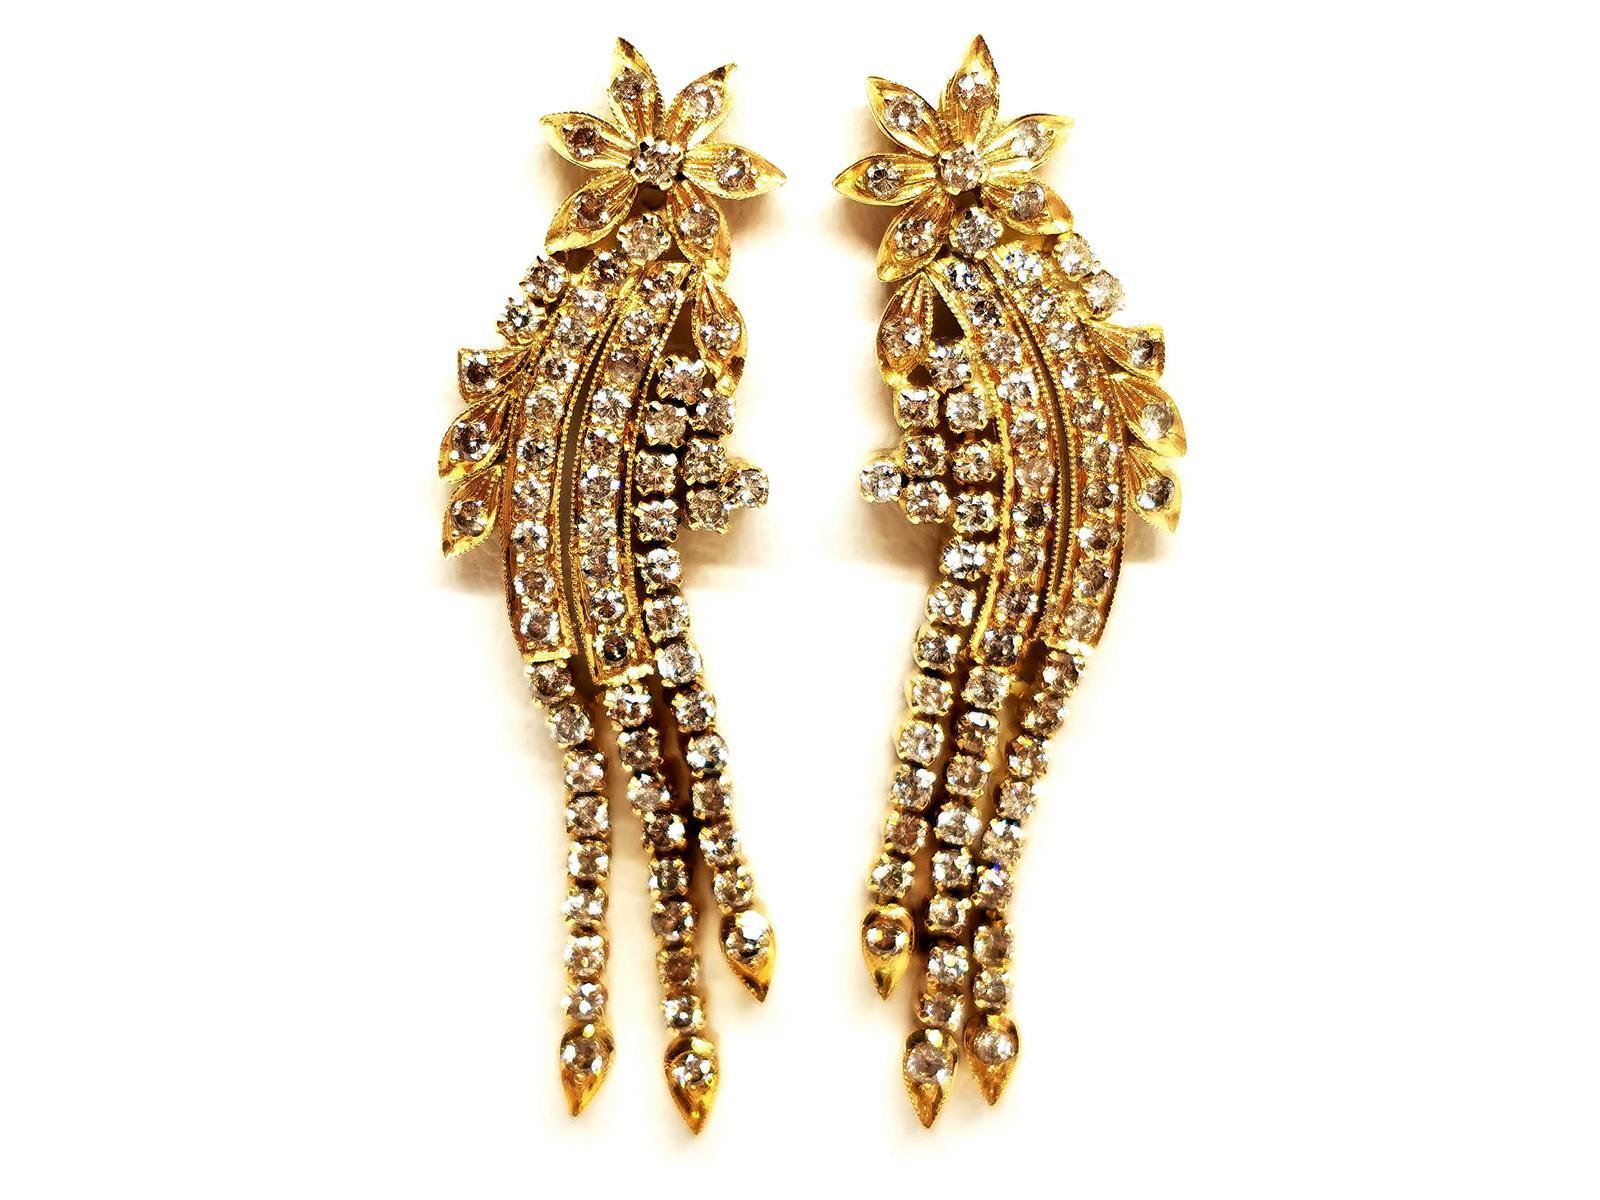 Earrings in yellow gold 585 thousandths (14 carats). shooting star. set with 138 diamonds. brilliant cut. about 0.015 ct each. total weight diamonds: about 2.07 ct. clasp alpa. length: 4.59 cm. width: 1.33 cm. total weight: 10.97 g. scallop punch.